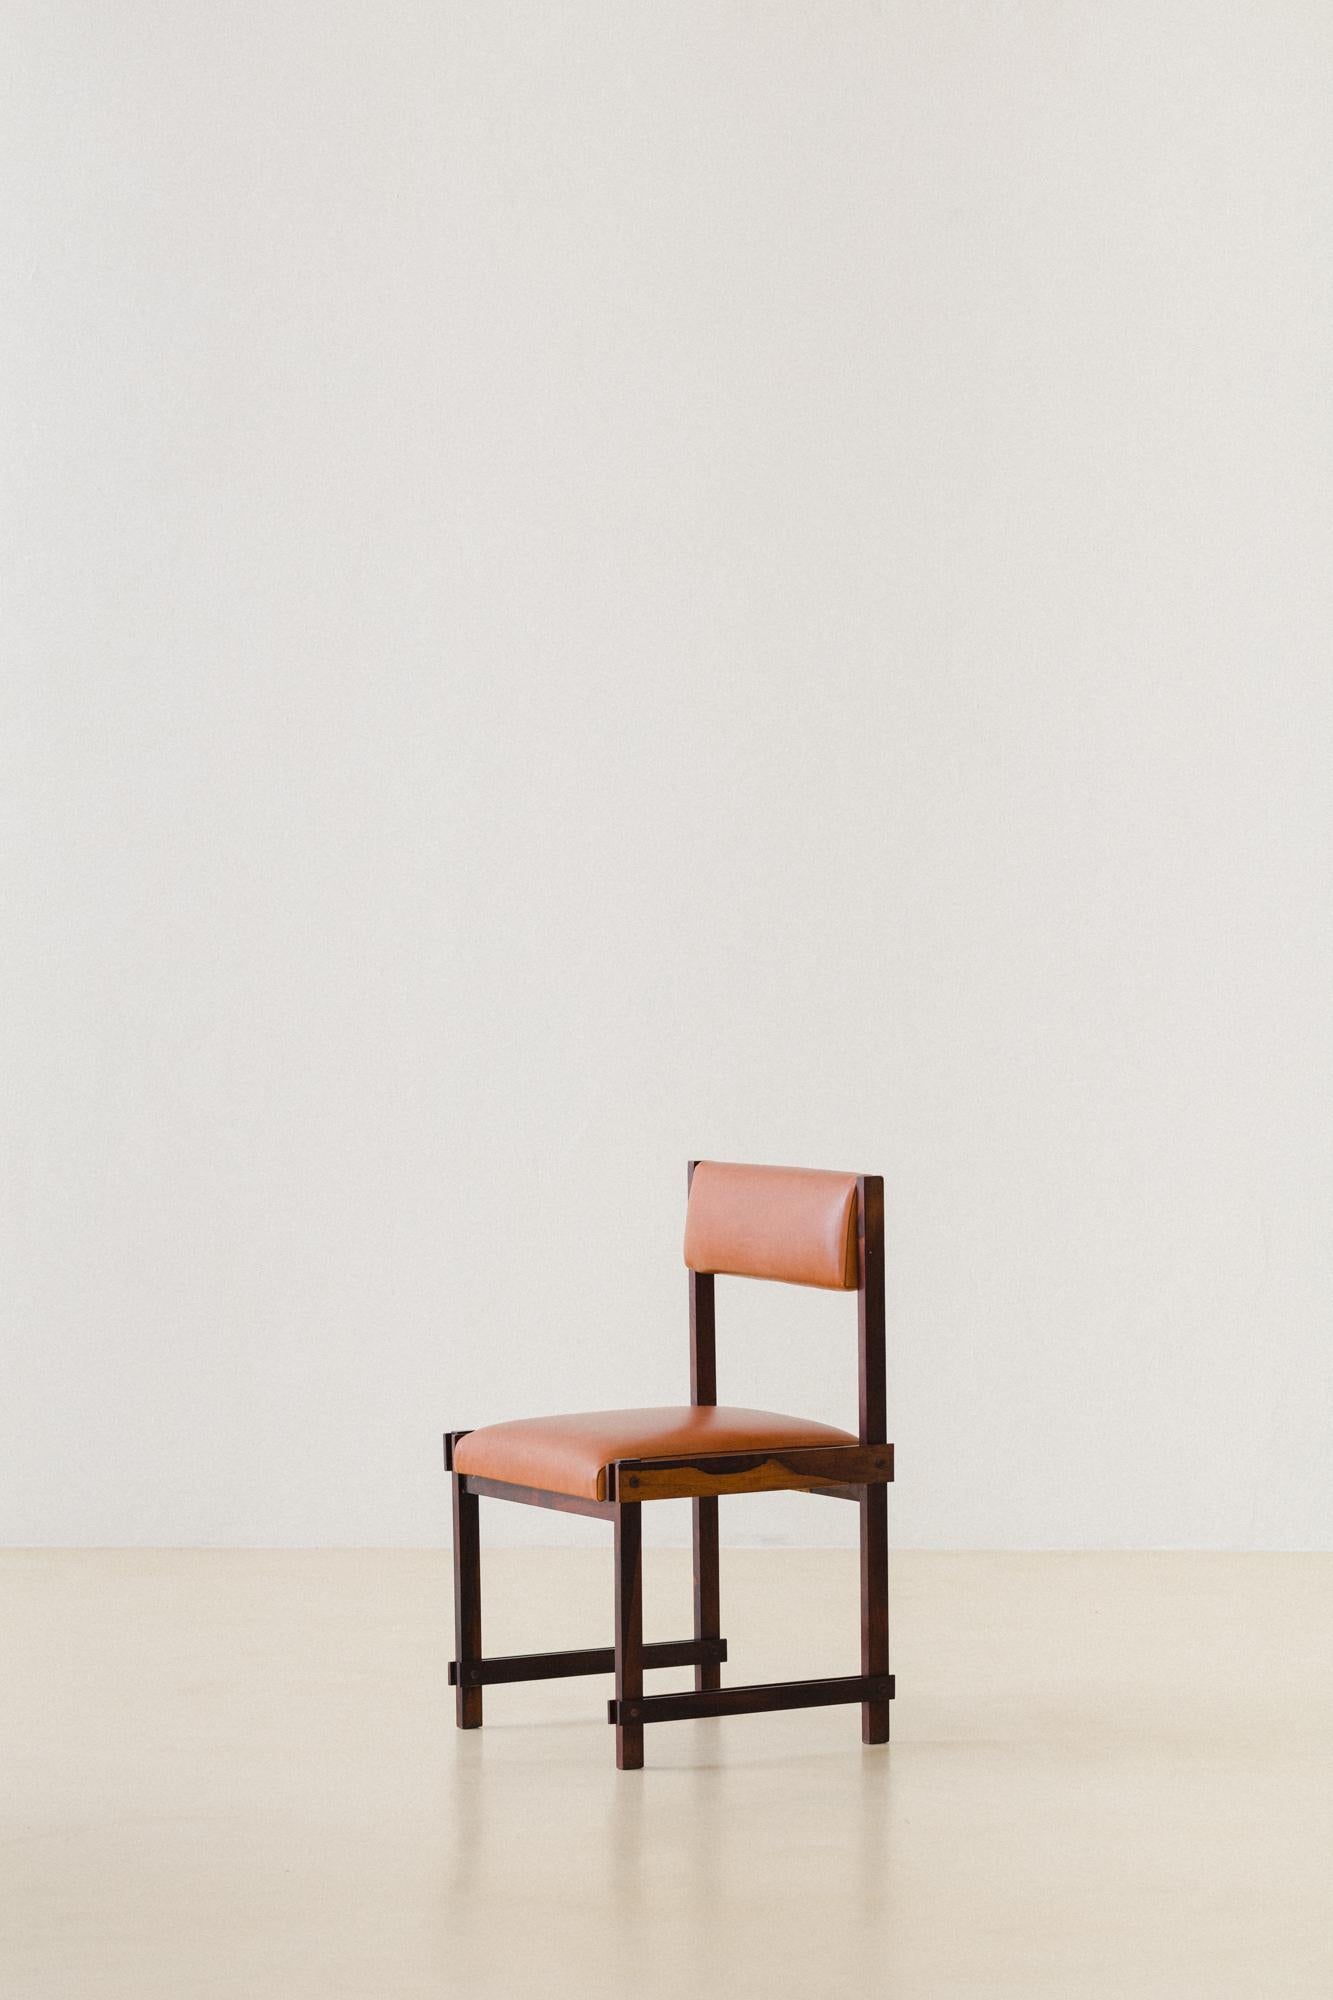 Leather Brazilian Rosewood Dining Chairs by FAI 'Fatima Arquitetura Interiores', 1960s For Sale